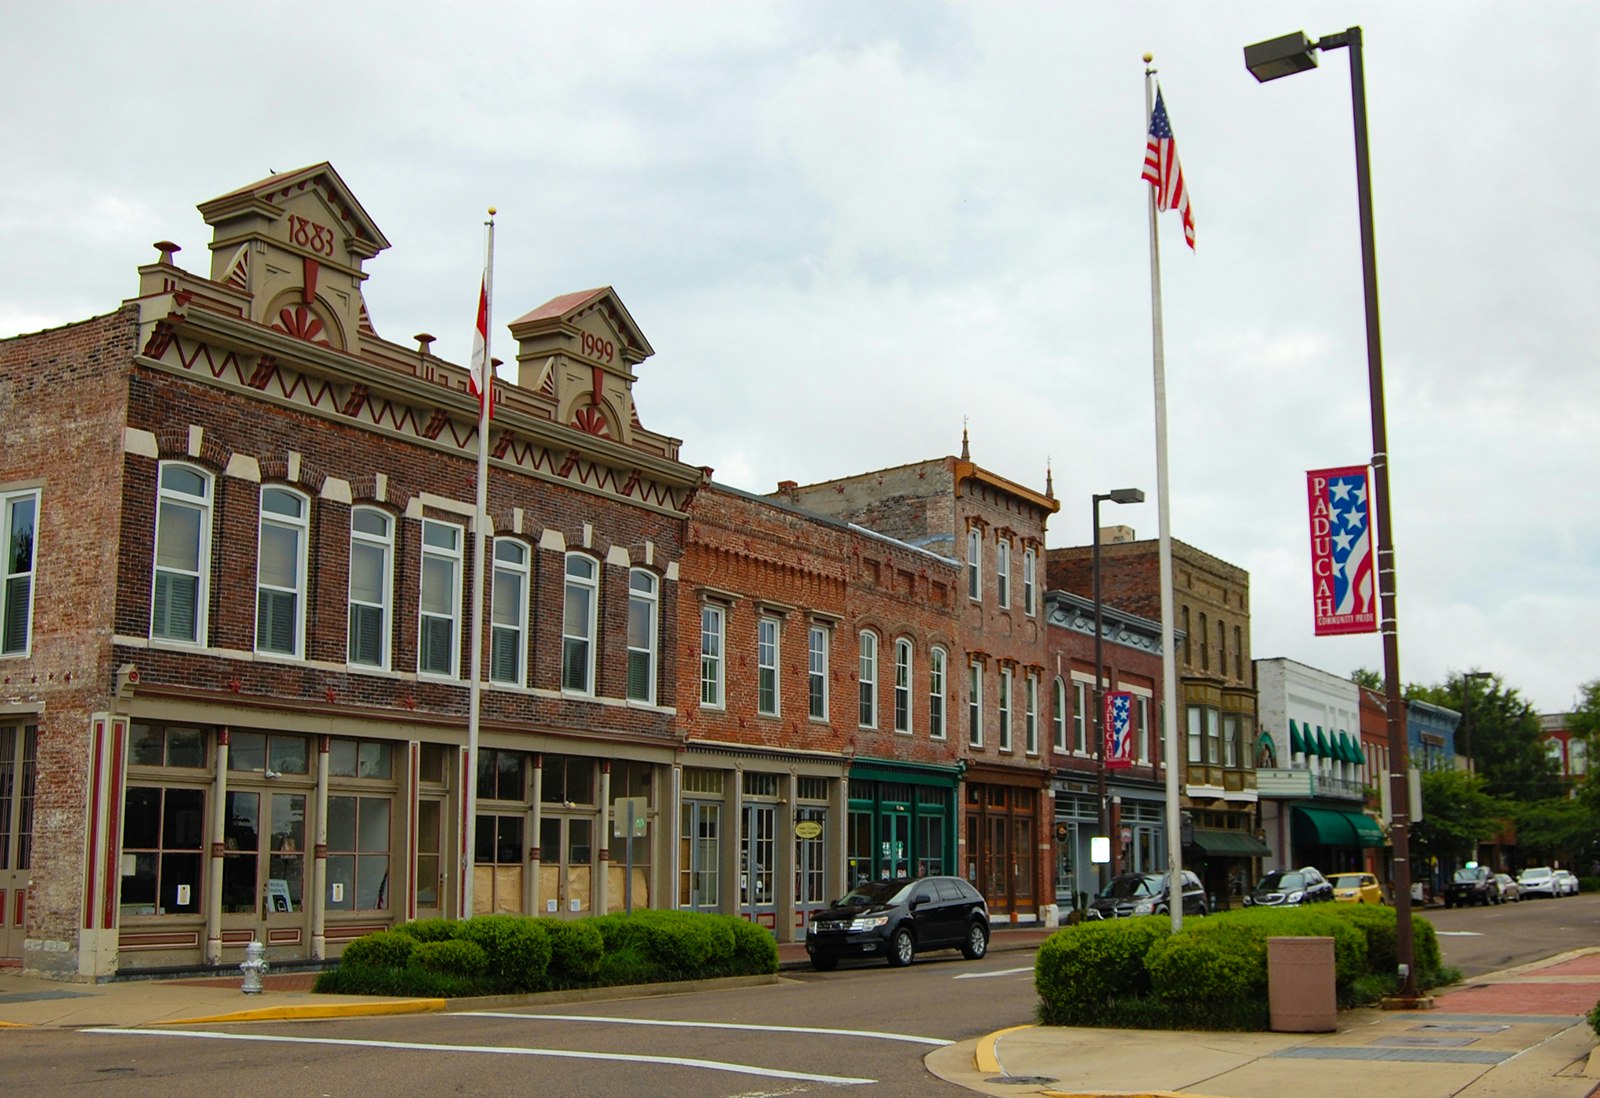 Angle shot of 19th-century commercial brick buildings lining the main street of Paducah, Kentucky, with an American flag in the foreground and clouds overhead